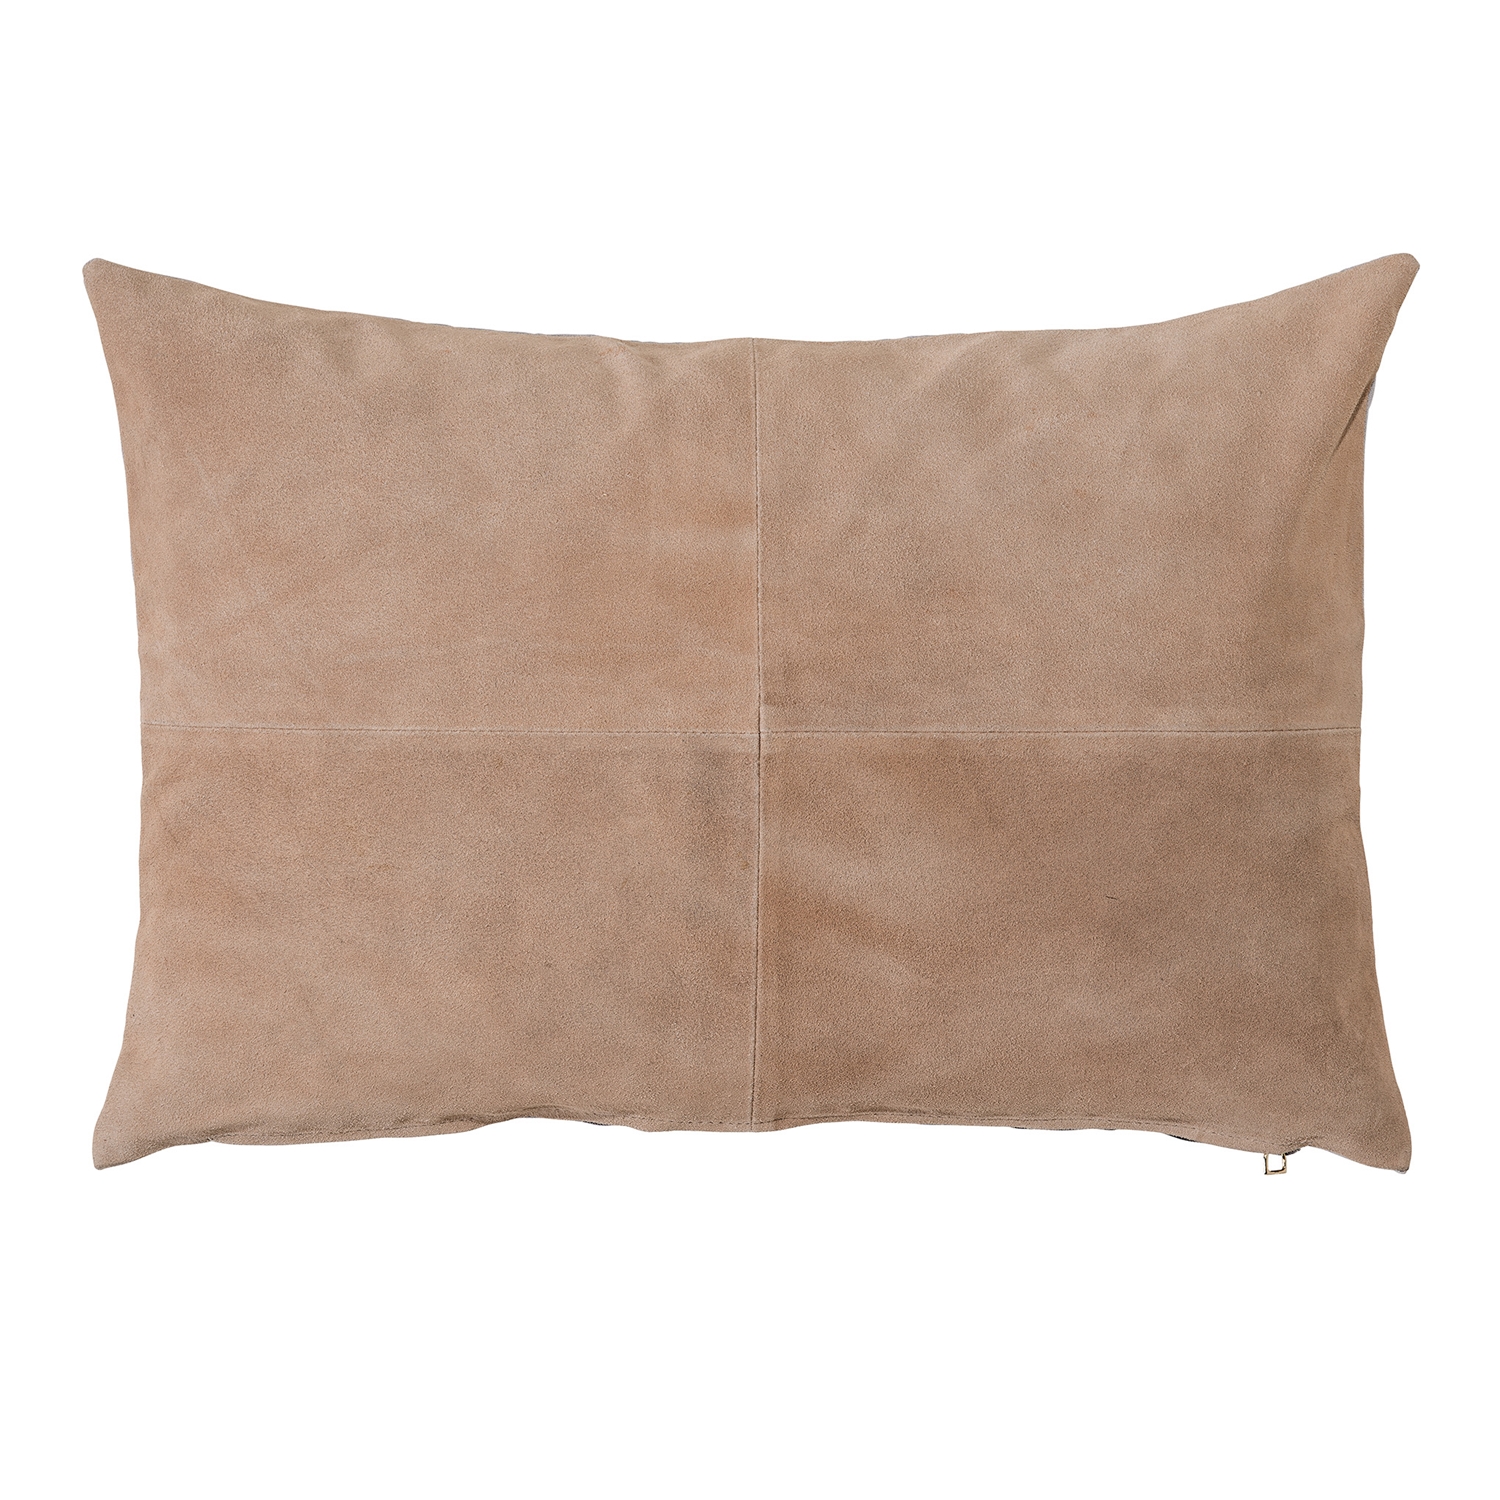 Rectangle Cushion in Light Brown colour - FurnitureDirect.com.my